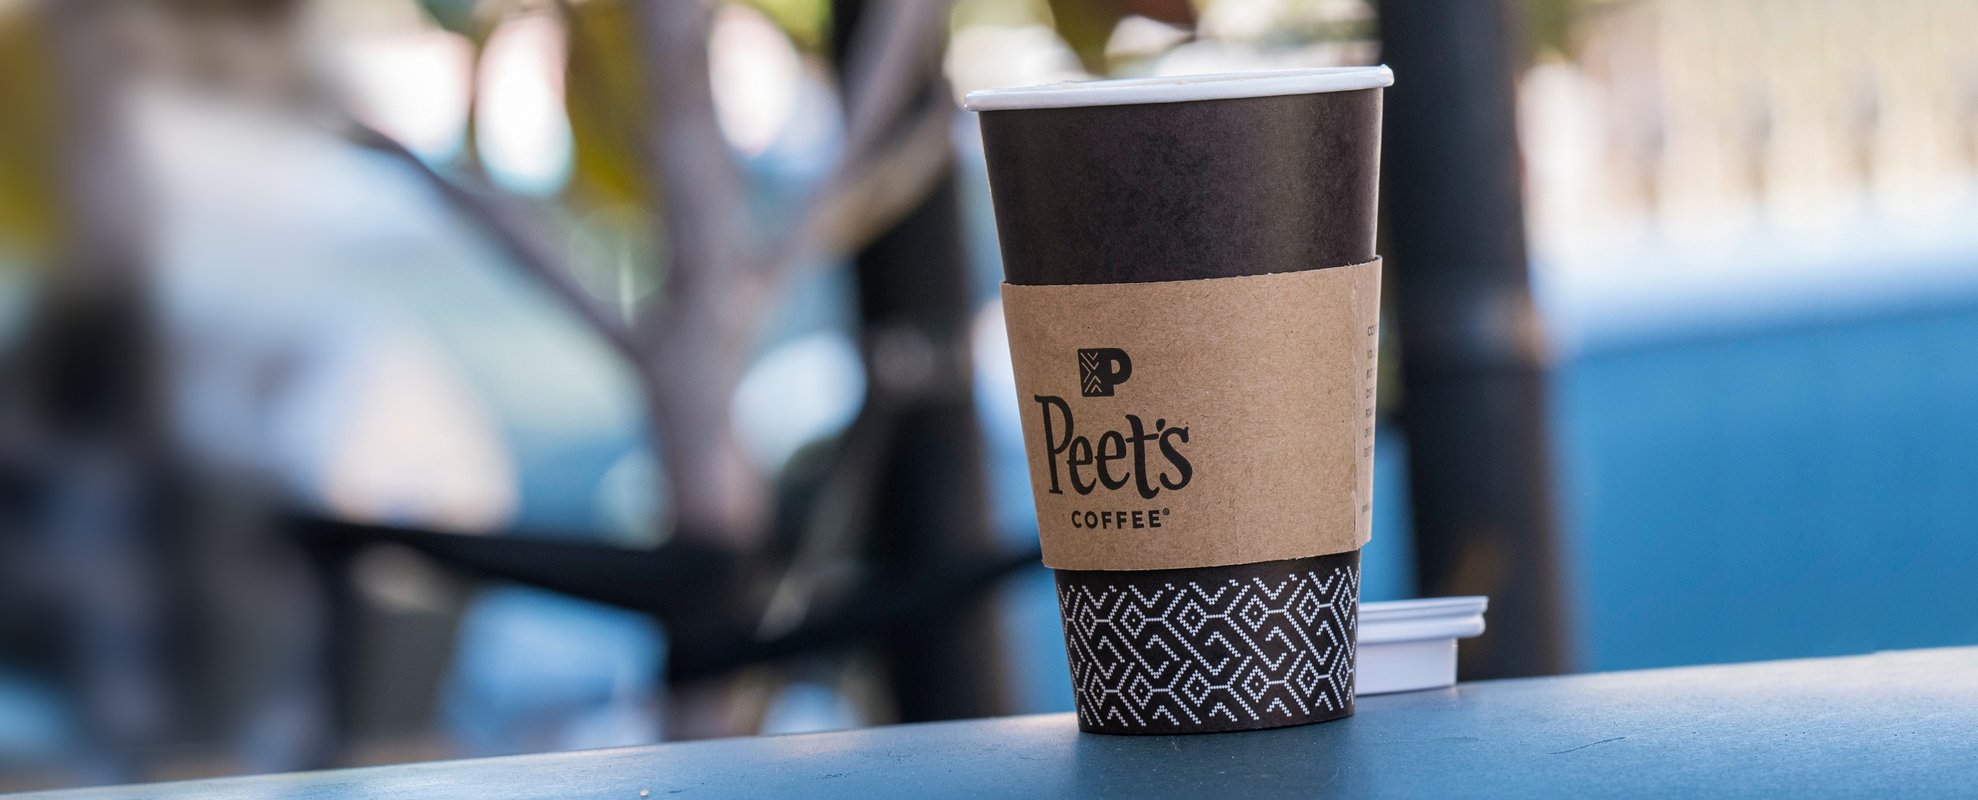 A disposable cup of JDE Peet's NV Coffee is sitting on a bench overlooking a park